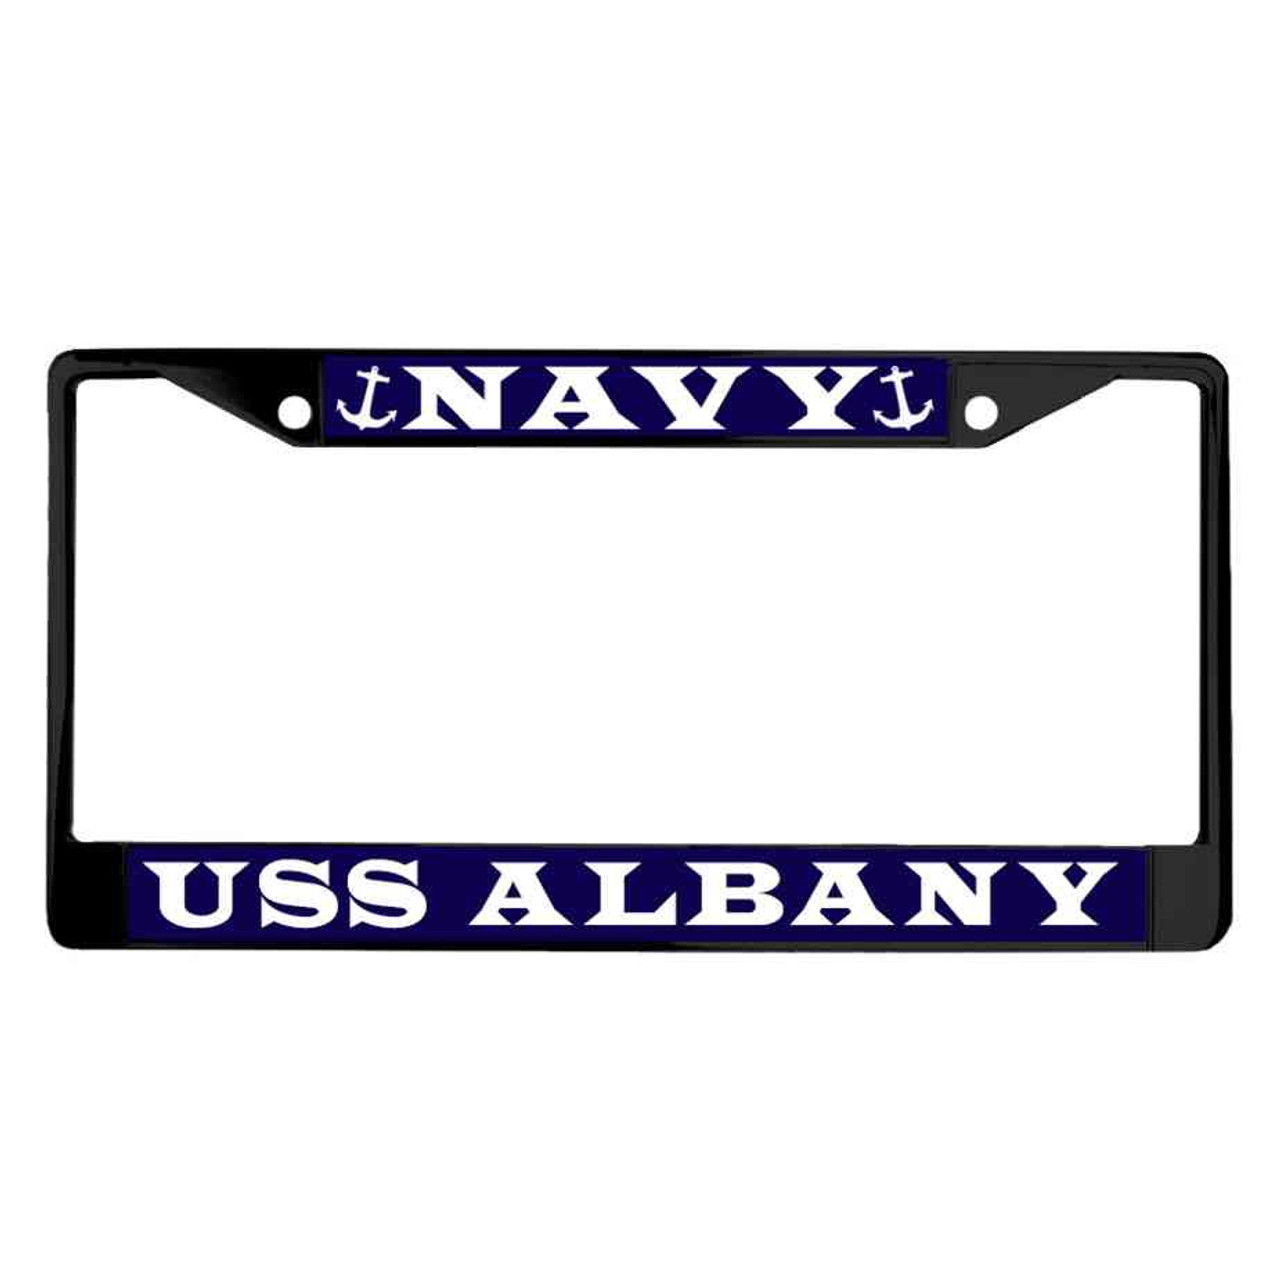 uss albany powder coated license plate frame